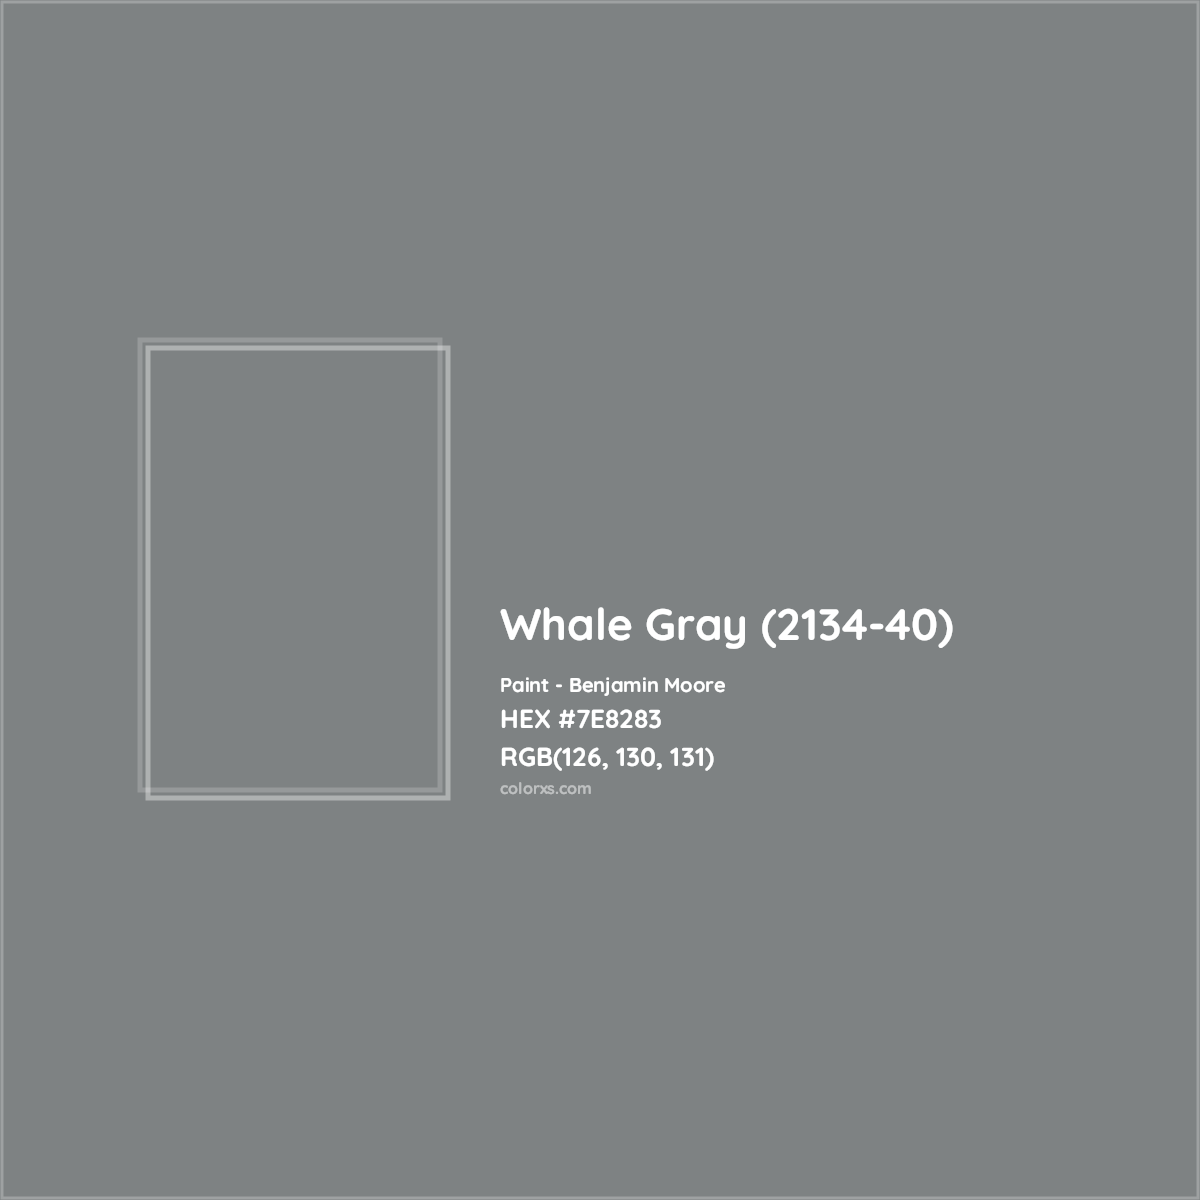 HEX #7E8283 Whale Gray (2134-40) Paint Benjamin Moore - Color Code